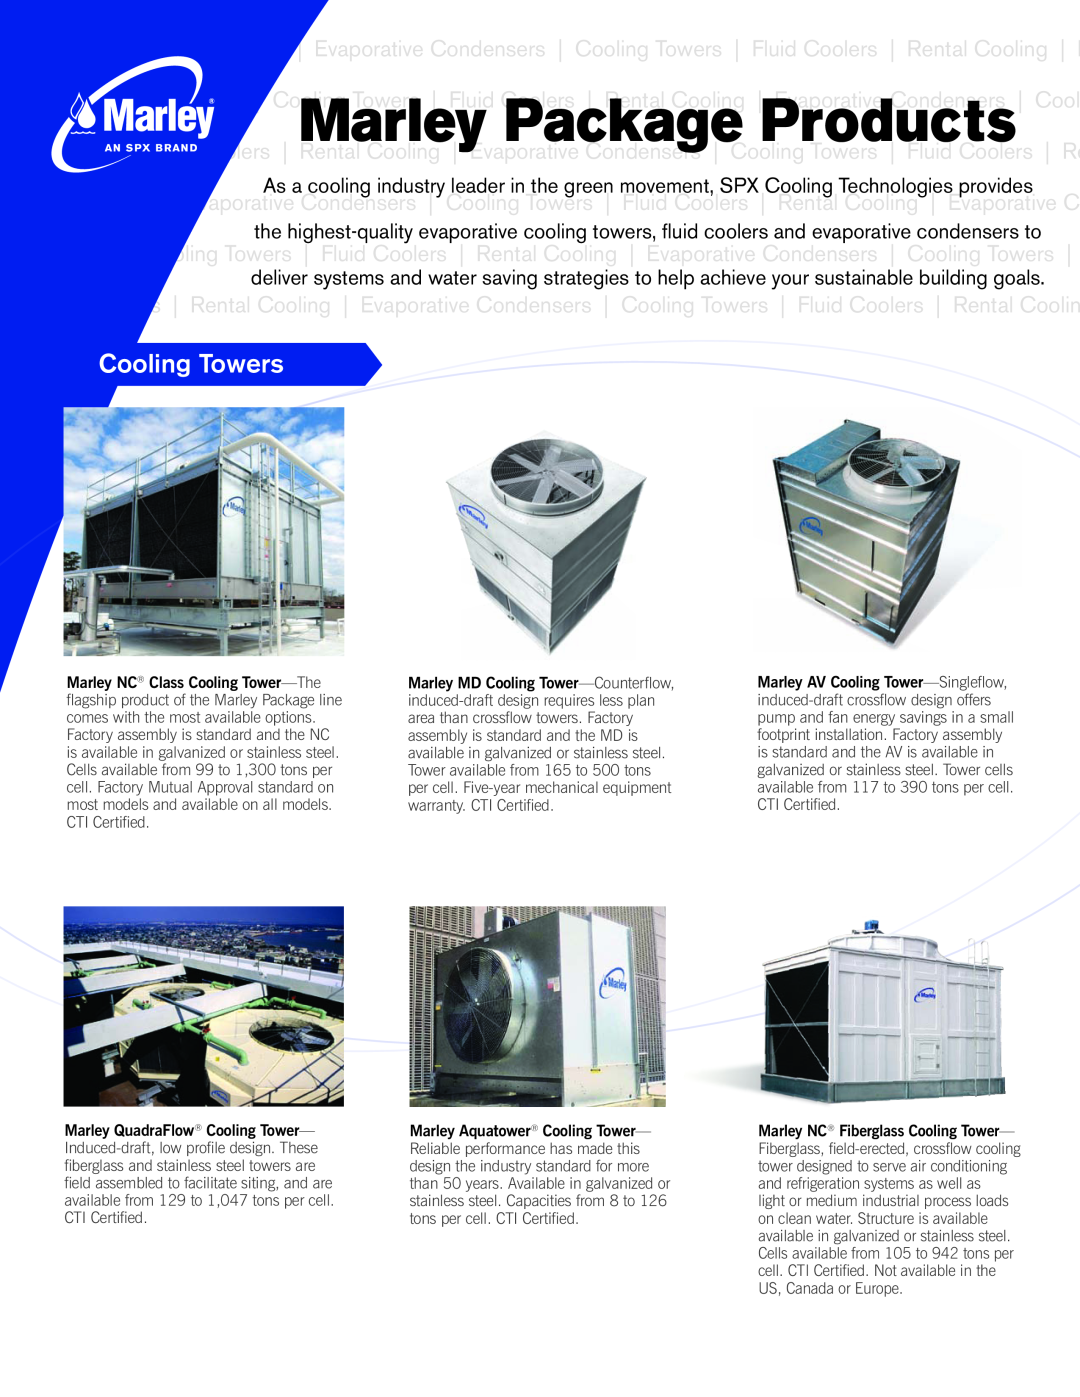 Marley Engineered Products Class Cooling Tower, Fiberglass Cooling Tower warranty Cooling Towers, Marley Package Products 